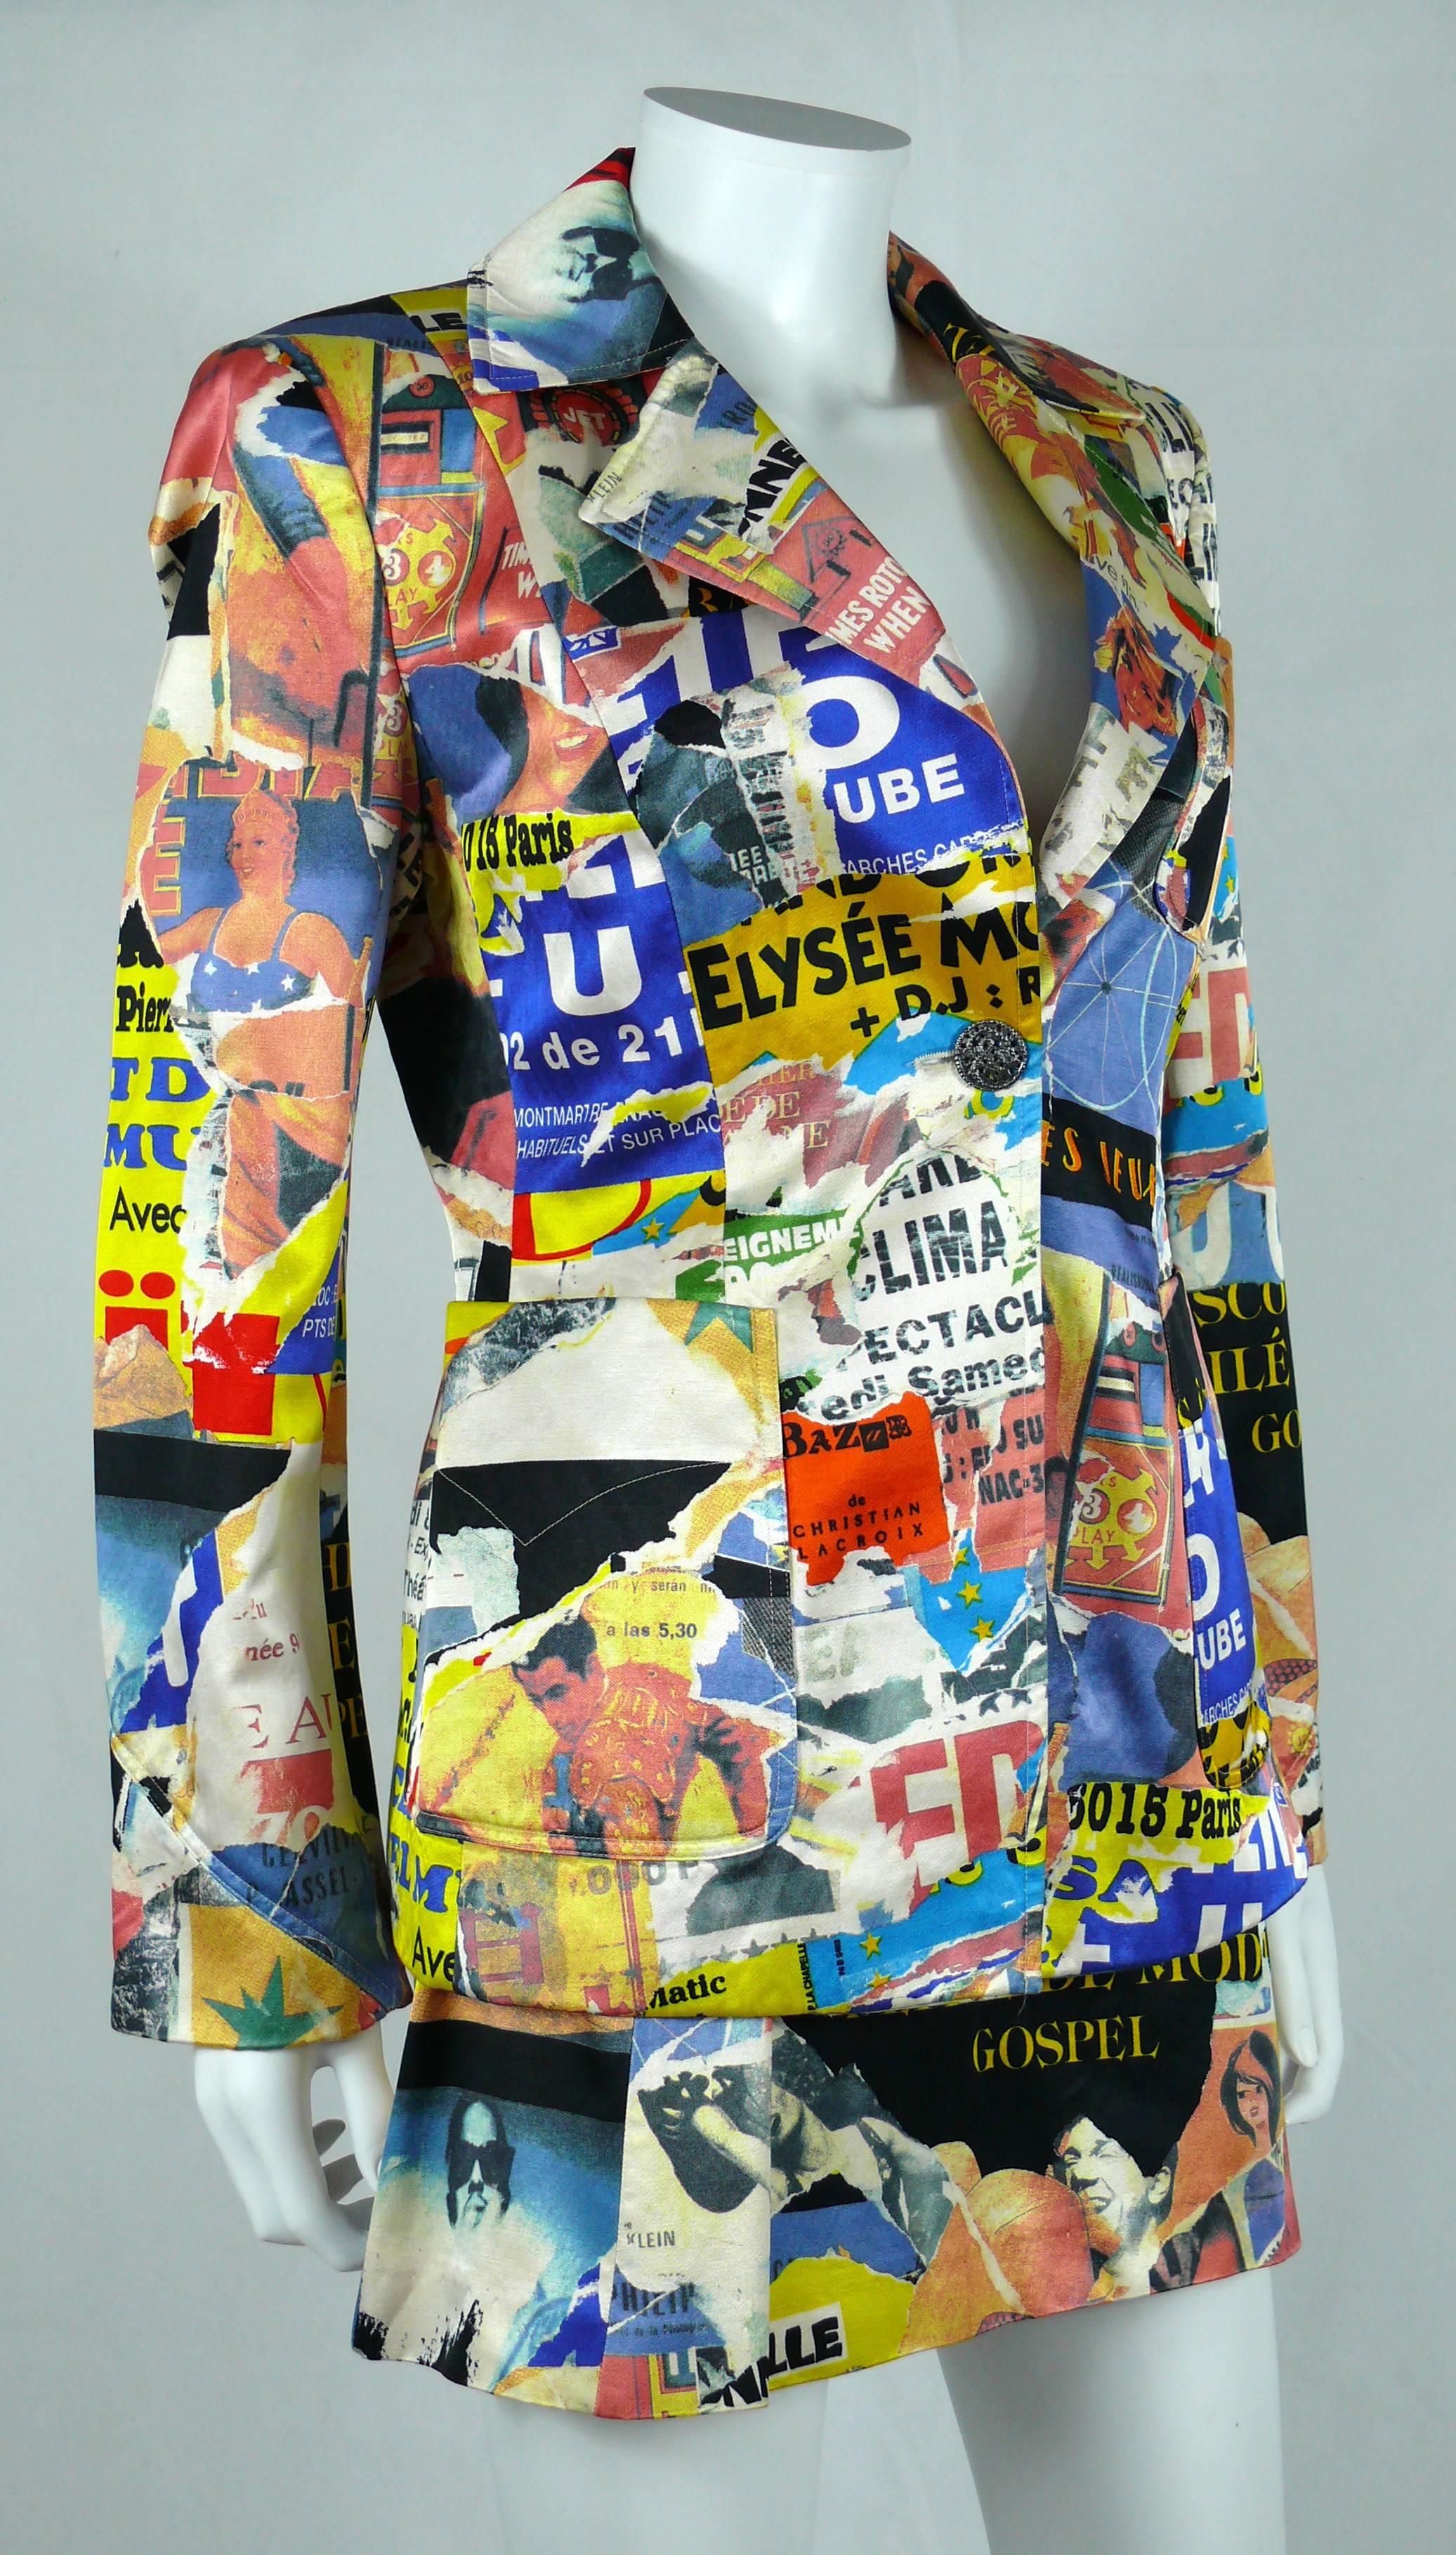 CHRISTIAN LACROIX Bazar vintage Pop Art blazer and skirt suit featuring a stunning lacerated poster print.

Label reads BAZAR de CHRISTIAN LACROIX.
Made in France. Modèle Déposé.
Composition and care labels.

BLAZER
Size label reads : 40 (please